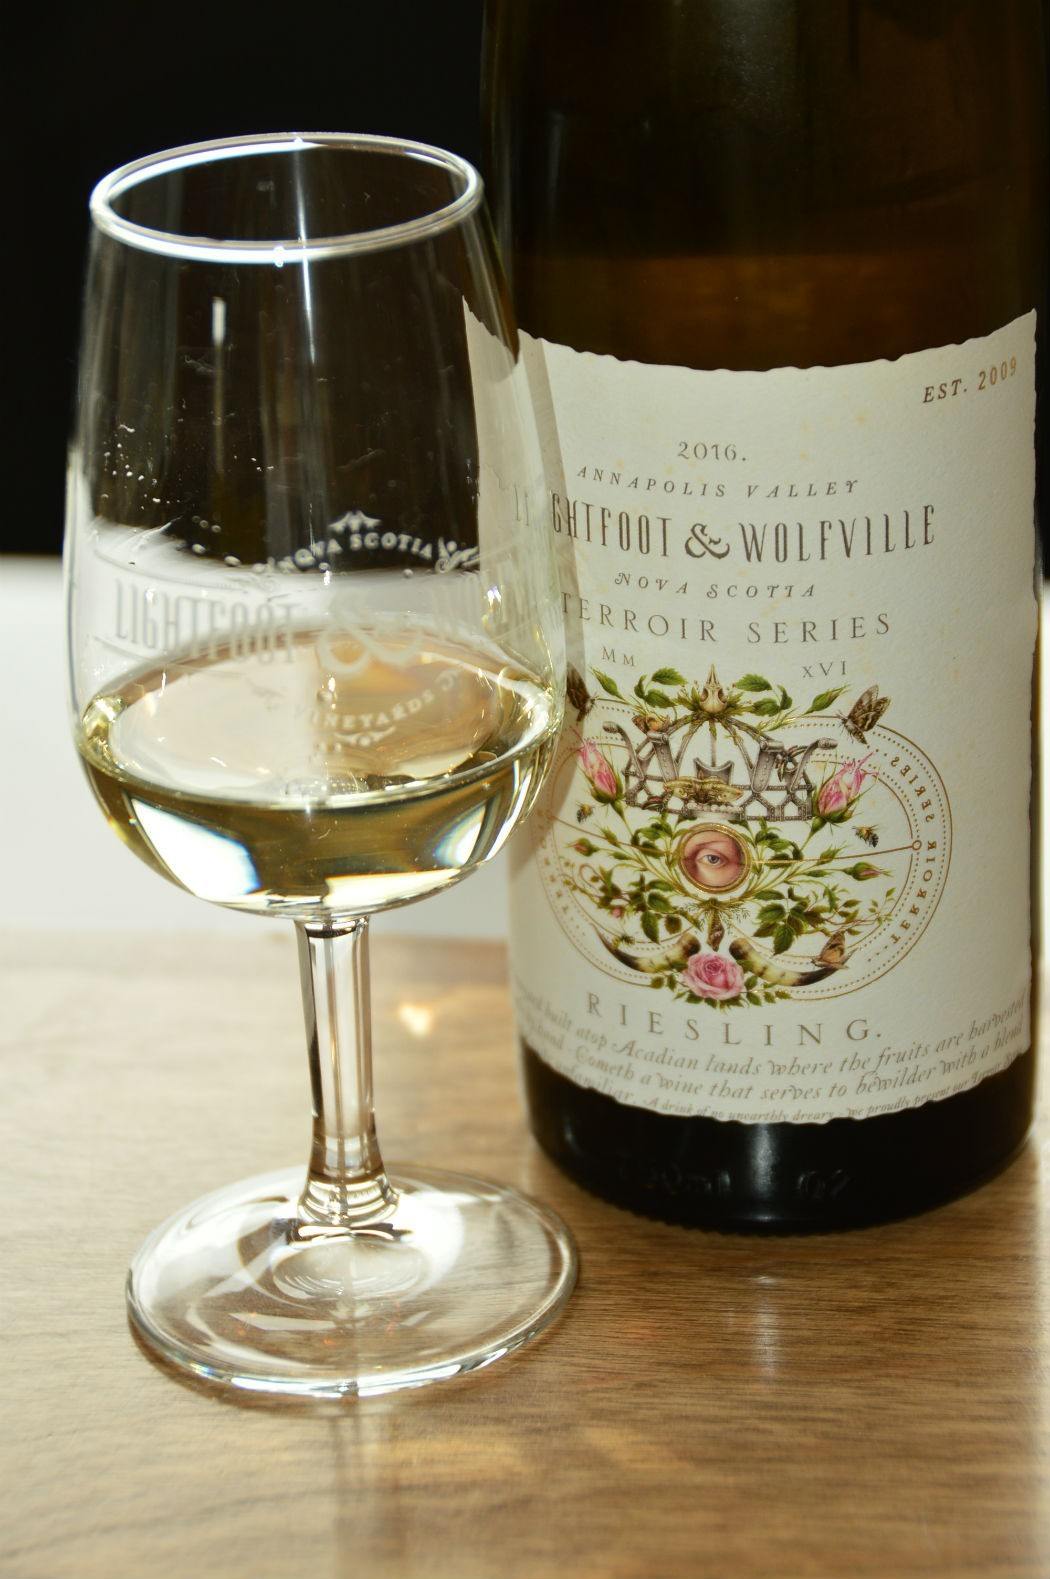 Lightfoot & Wolfville wine bottle and glass of white wine